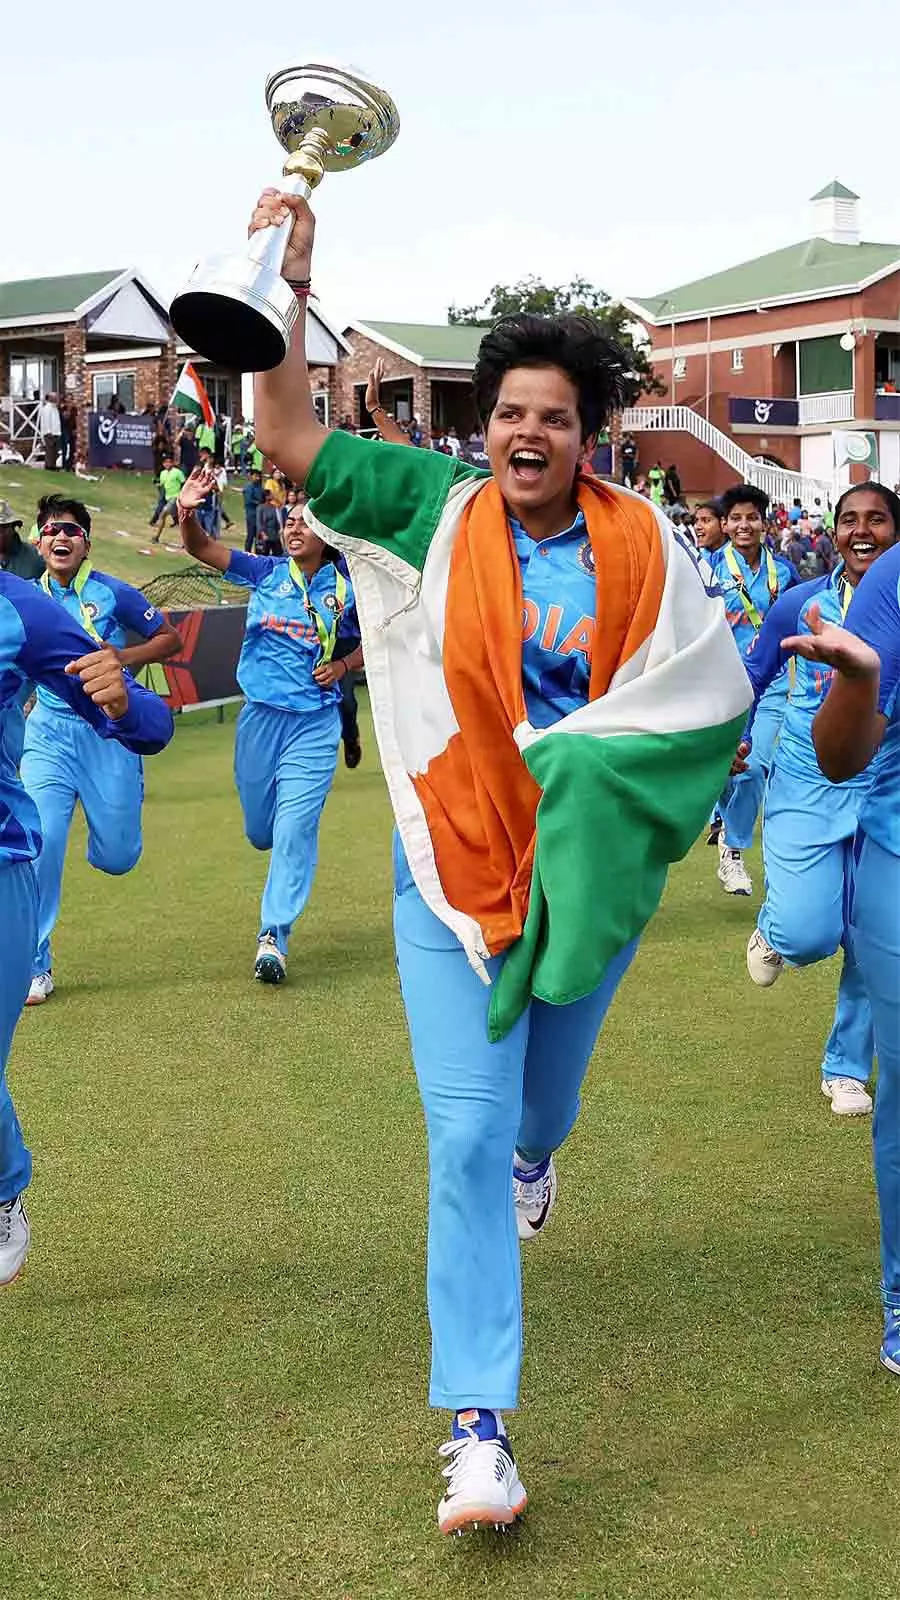 In Pics: Women's U-19 T20 World Cup - The top individual performers